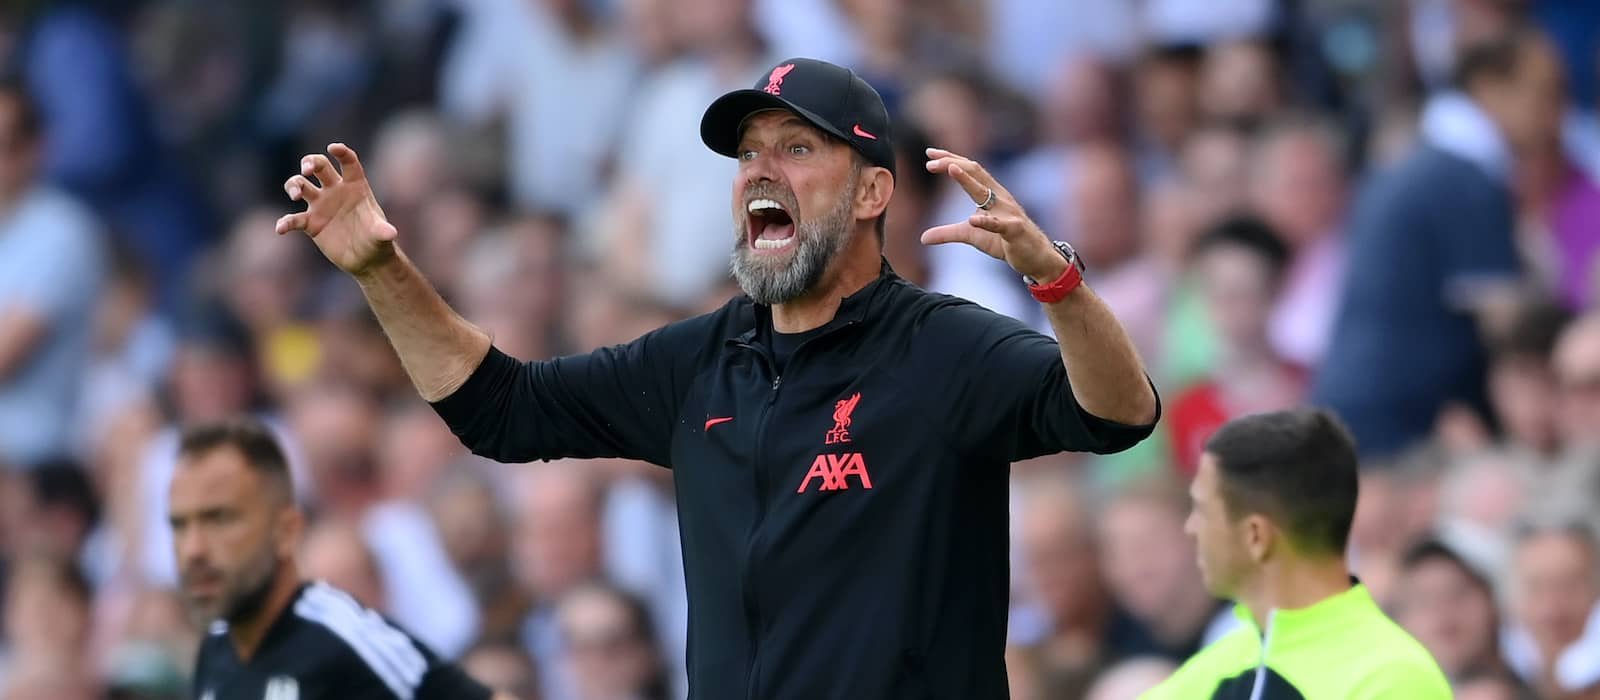 Roy Keane questions timing of Jurgen Klopp’s decision to leave Liverpool – Man United News And Transfer News